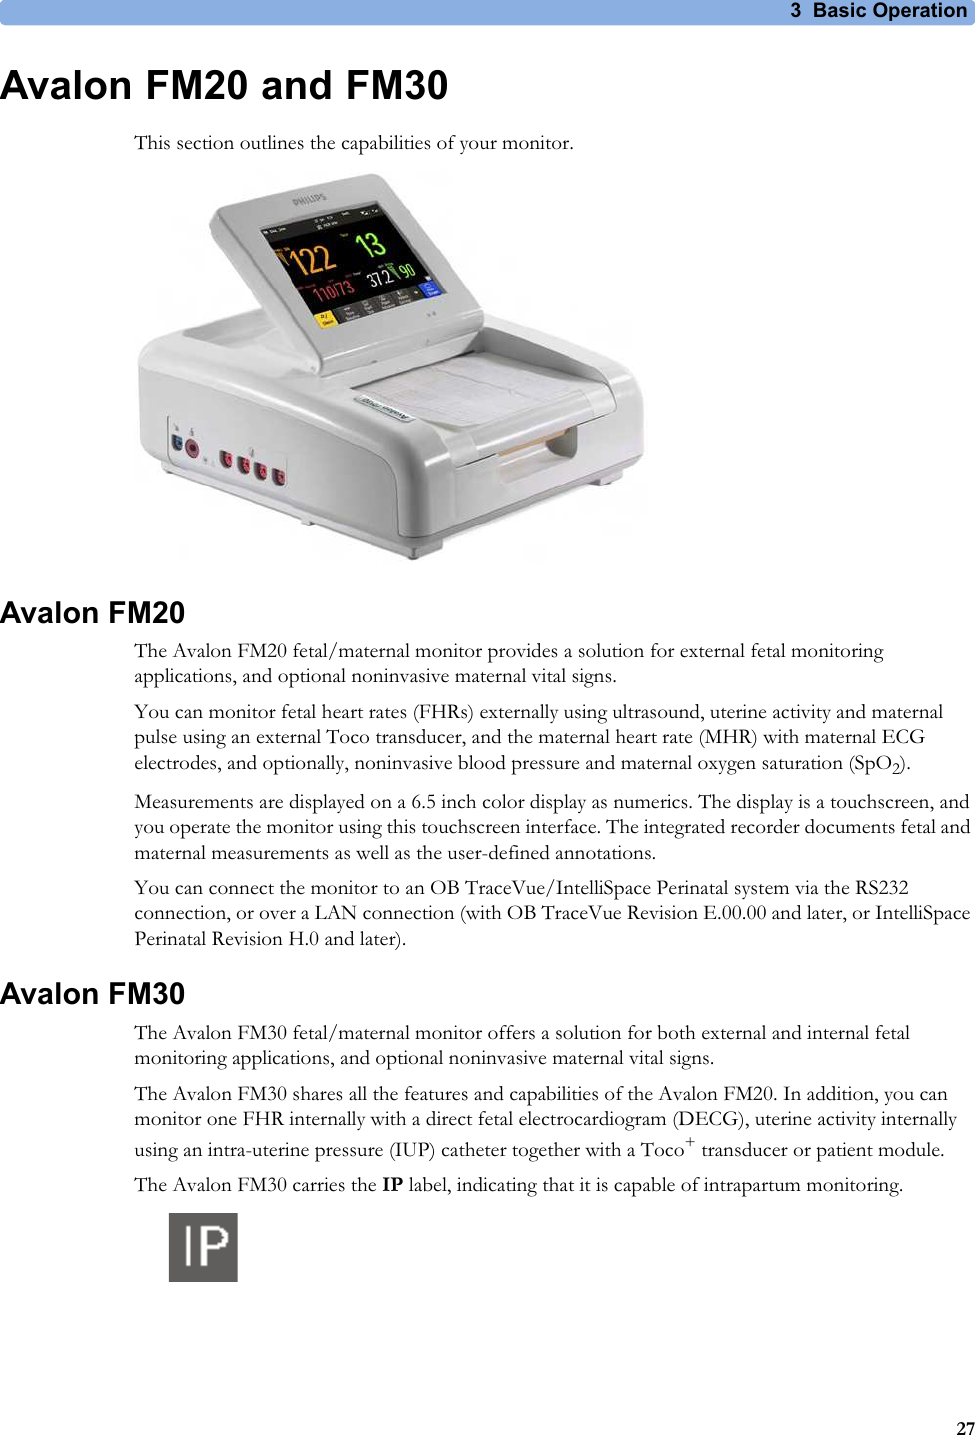 3  Basic Operation27Avalon FM20 and FM30This section outlines the capabilities of your monitor.Avalon FM20The Avalon FM20 fetal/maternal monitor provides a solution for external fetal monitoring applications, and optional noninvasive maternal vital signs.You can monitor fetal heart rates (FHRs) externally using ultrasound, uterine activity and maternal pulse using an external Toco transducer, and the maternal heart rate (MHR) with maternal ECG electrodes, and optionally, noninvasive blood pressure and maternal oxygen saturation (SpO2).Measurements are displayed on a 6.5 inch color display as numerics. The display is a touchscreen, and you operate the monitor using this touchscreen interface. The integrated recorder documents fetal and maternal measurements as well as the user-defined annotations.You can connect the monitor to an OB TraceVue/IntelliSpace Perinatal system via the RS232 connection, or over a LAN connection (with OB TraceVue Revision E.00.00 and later, or IntelliSpace Perinatal Revision H.0 and later).Avalon FM30The Avalon FM30 fetal/maternal monitor offers a solution for both external and internal fetal monitoring applications, and optional noninvasive maternal vital signs.The Avalon FM30 shares all the features and capabilities of the Avalon FM20. In addition, you can monitor one FHR internally with a direct fetal electrocardiogram (DECG), uterine activity internally using an intra-uterine pressure (IUP) catheter together with a Toco+ transducer or patient module.The Avalon FM30 carries the IP label, indicating that it is capable of intrapartum monitoring.